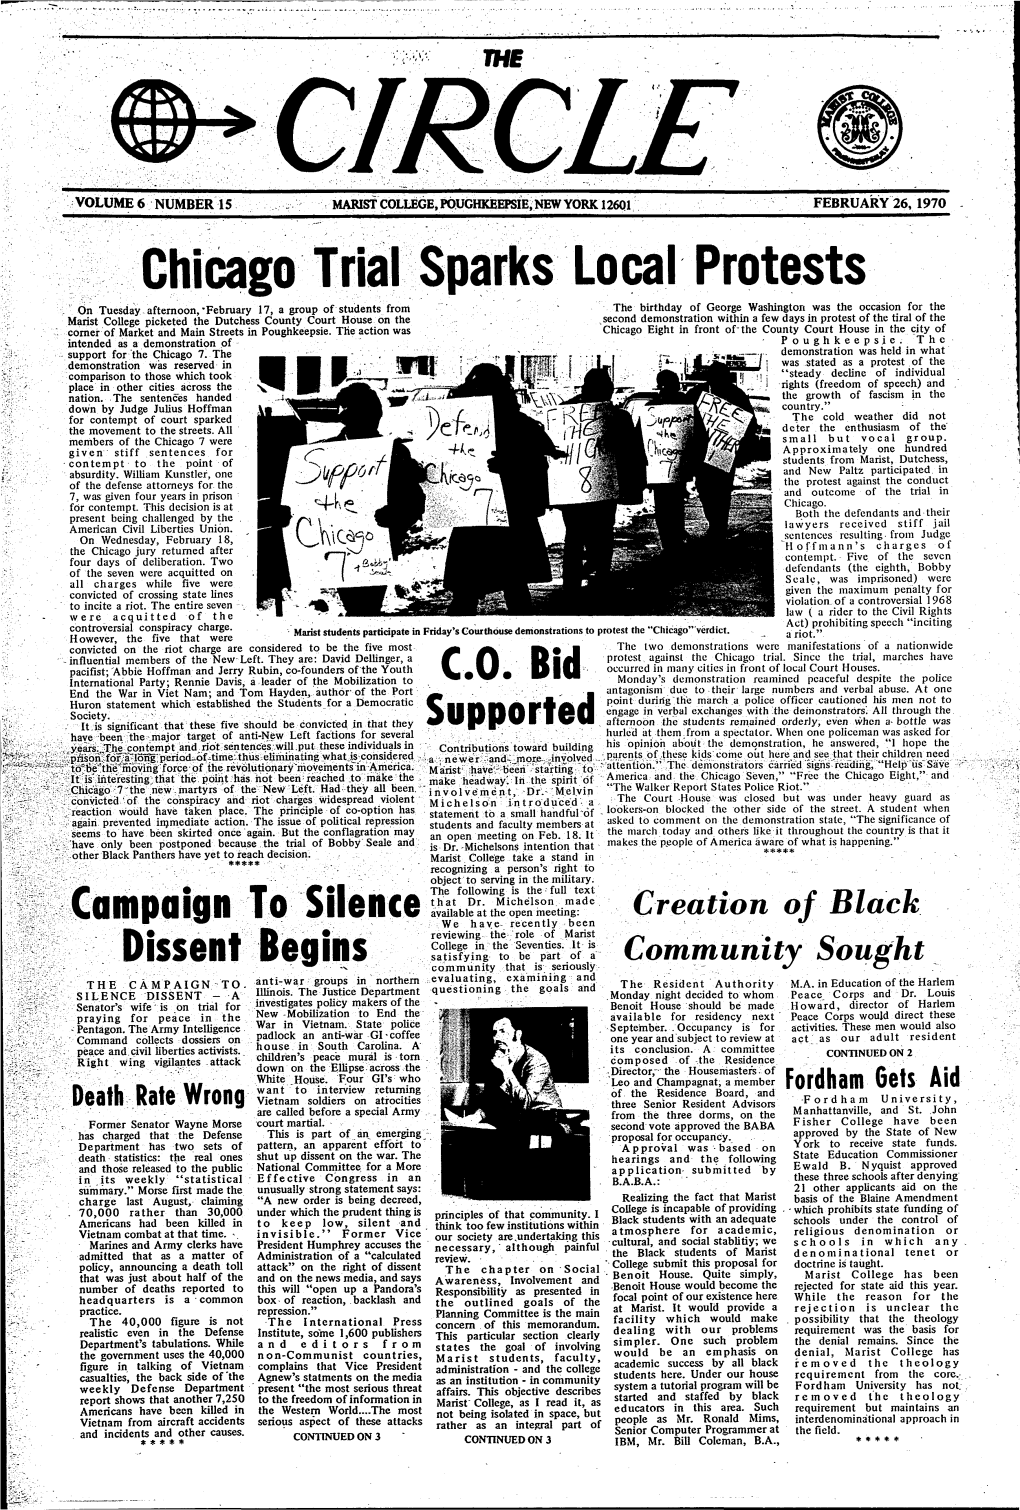 Chicago Trial Sparks Local Protests